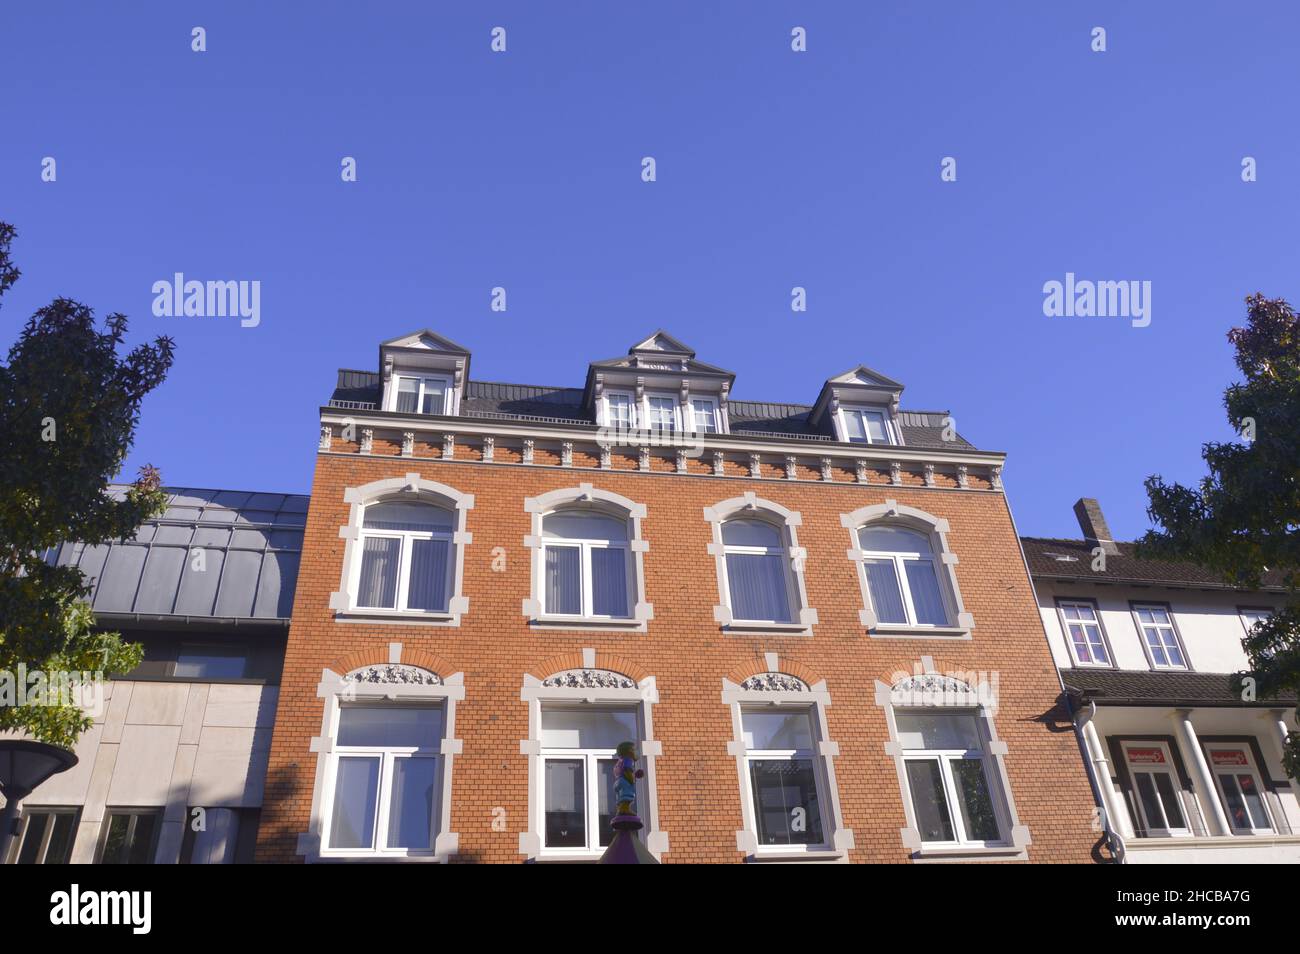 Buildings in the old town of Rinteln, Germany Stock Photo